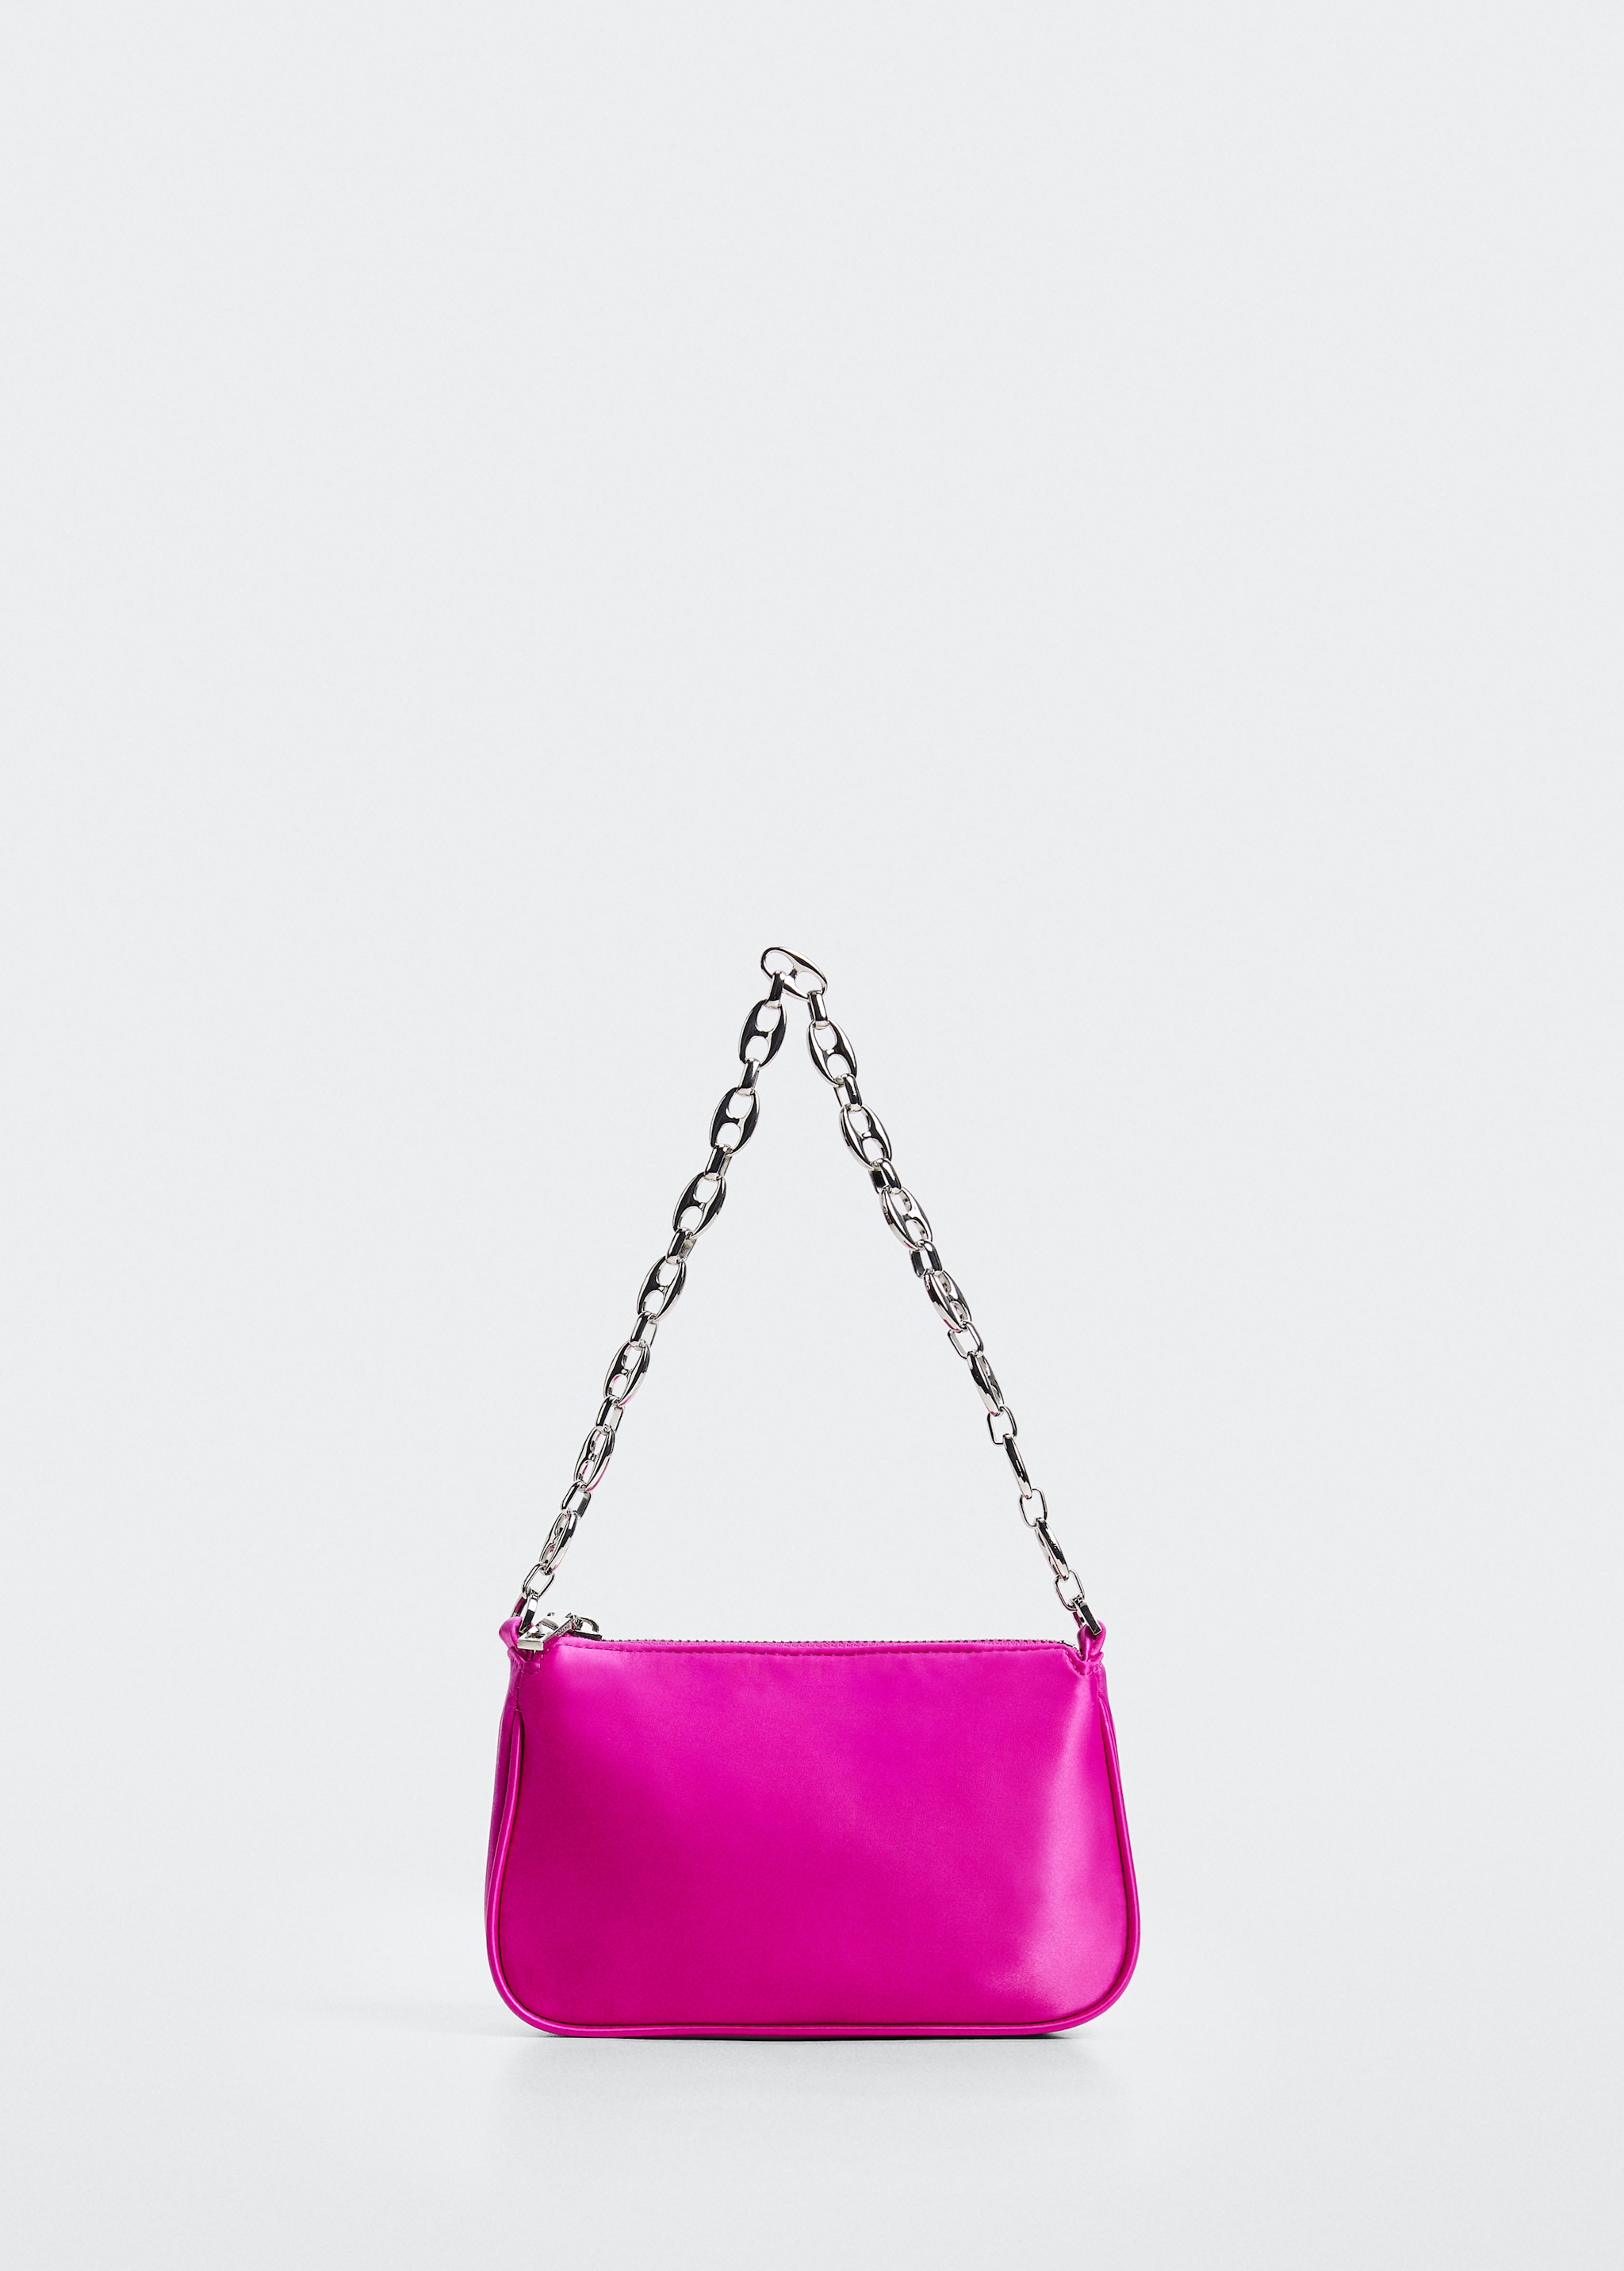 Satin chain bag - Article without model